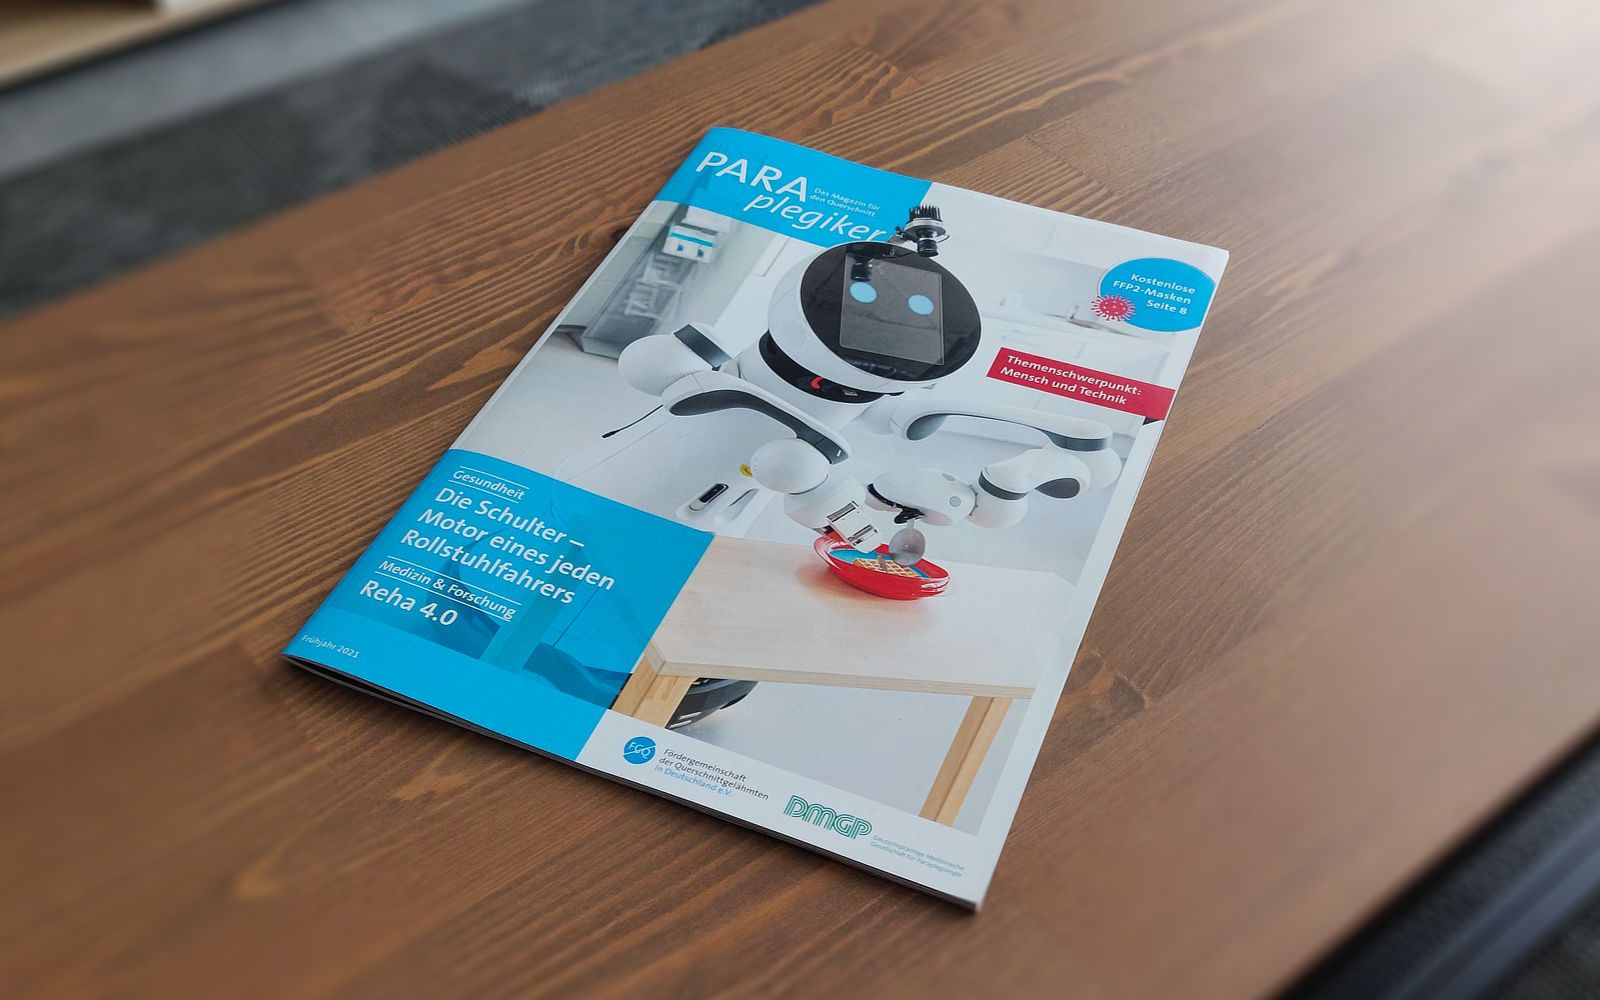 The cover of the PARAplegiker magazine displays a home robot.